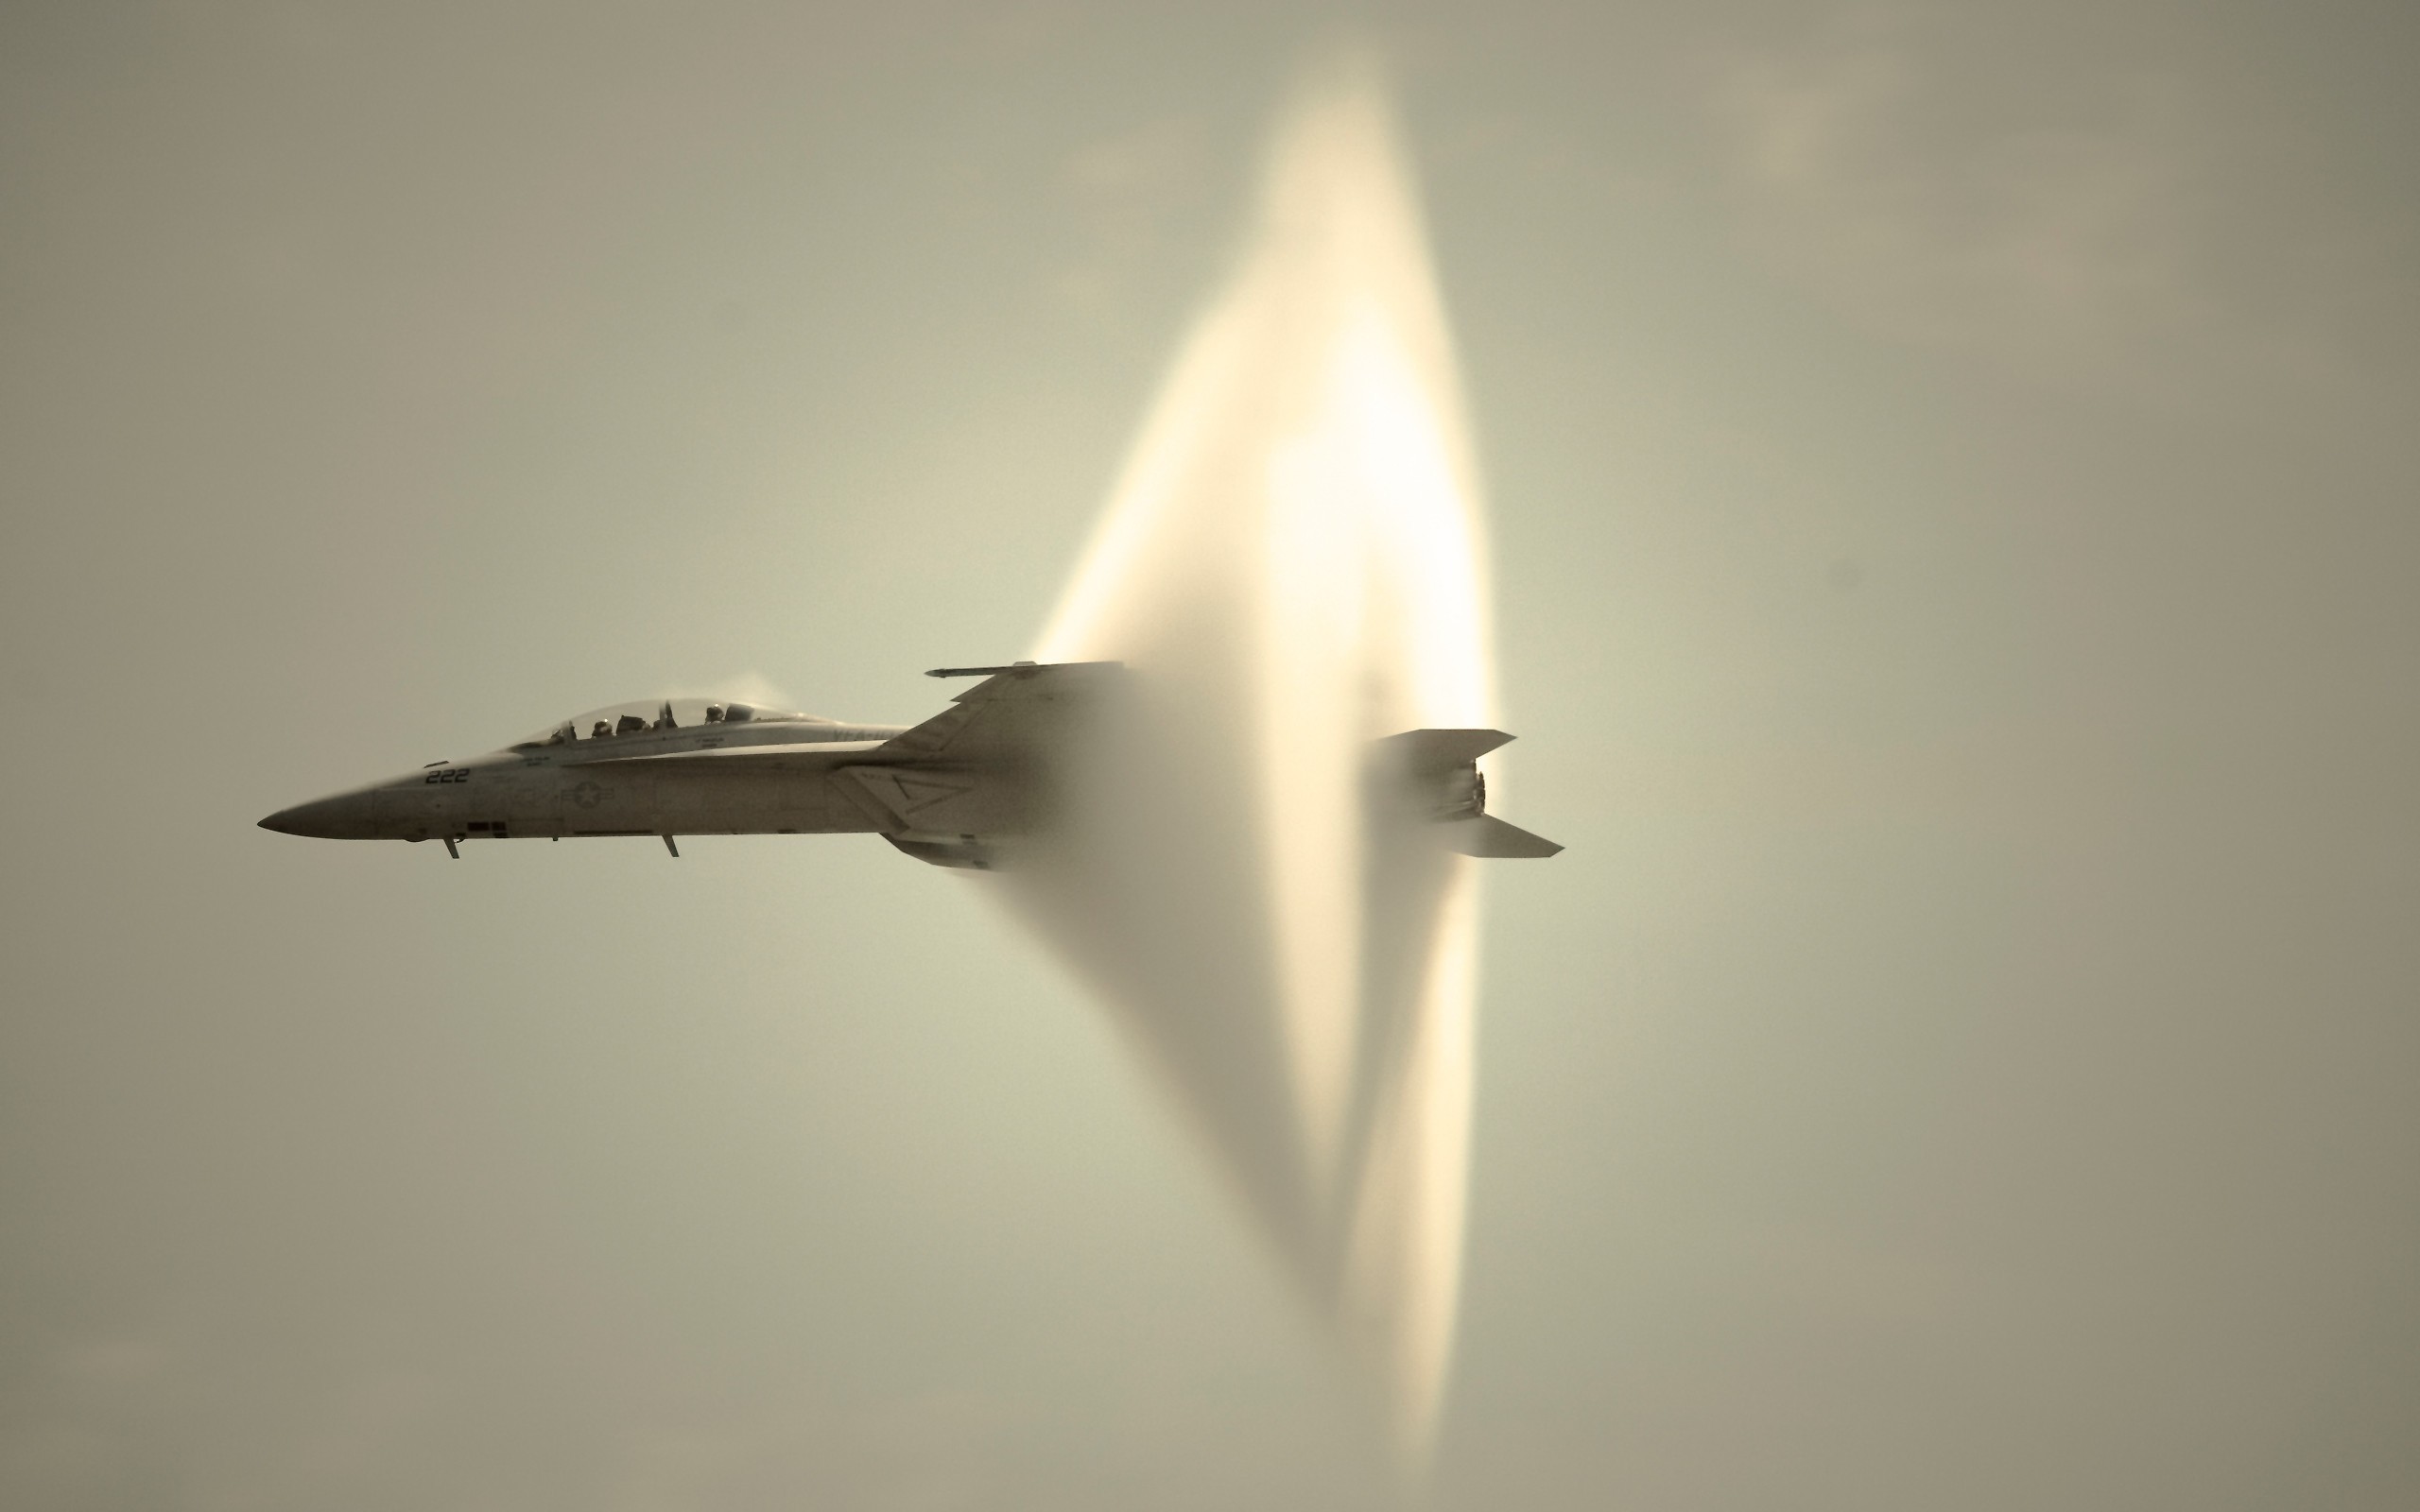 General 2560x1600 aircraft military aircraft vehicle military McDonnell Douglas McDonnell Douglas F/A-18 Hornet military vehicle sonic booms condensation clouds